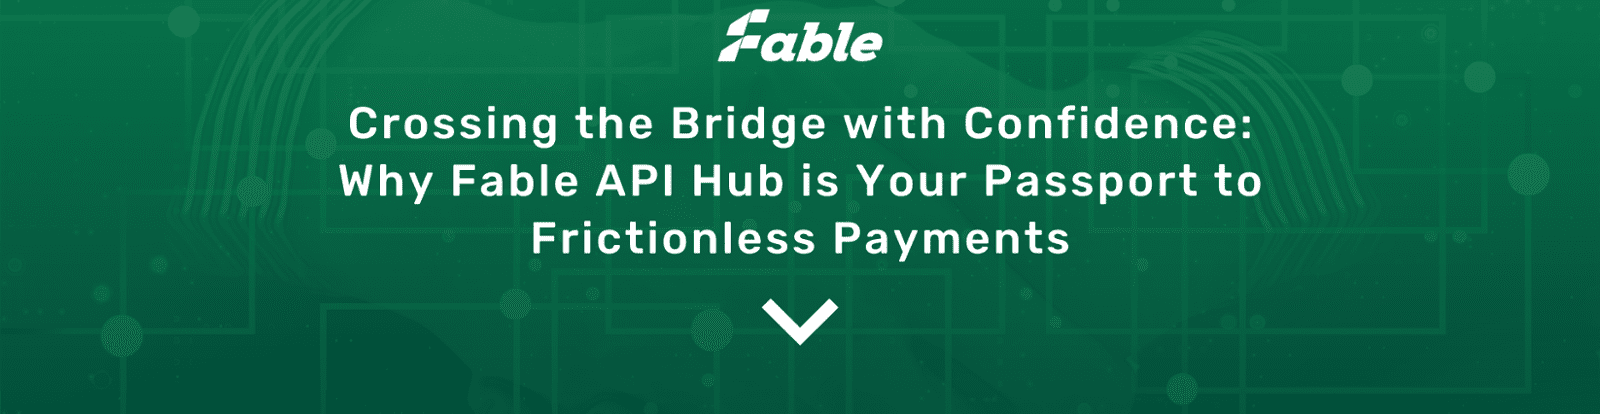 Crossing the Bridge with Confidence: Why Fable API Hub is Your Passport to Frictionless Payments